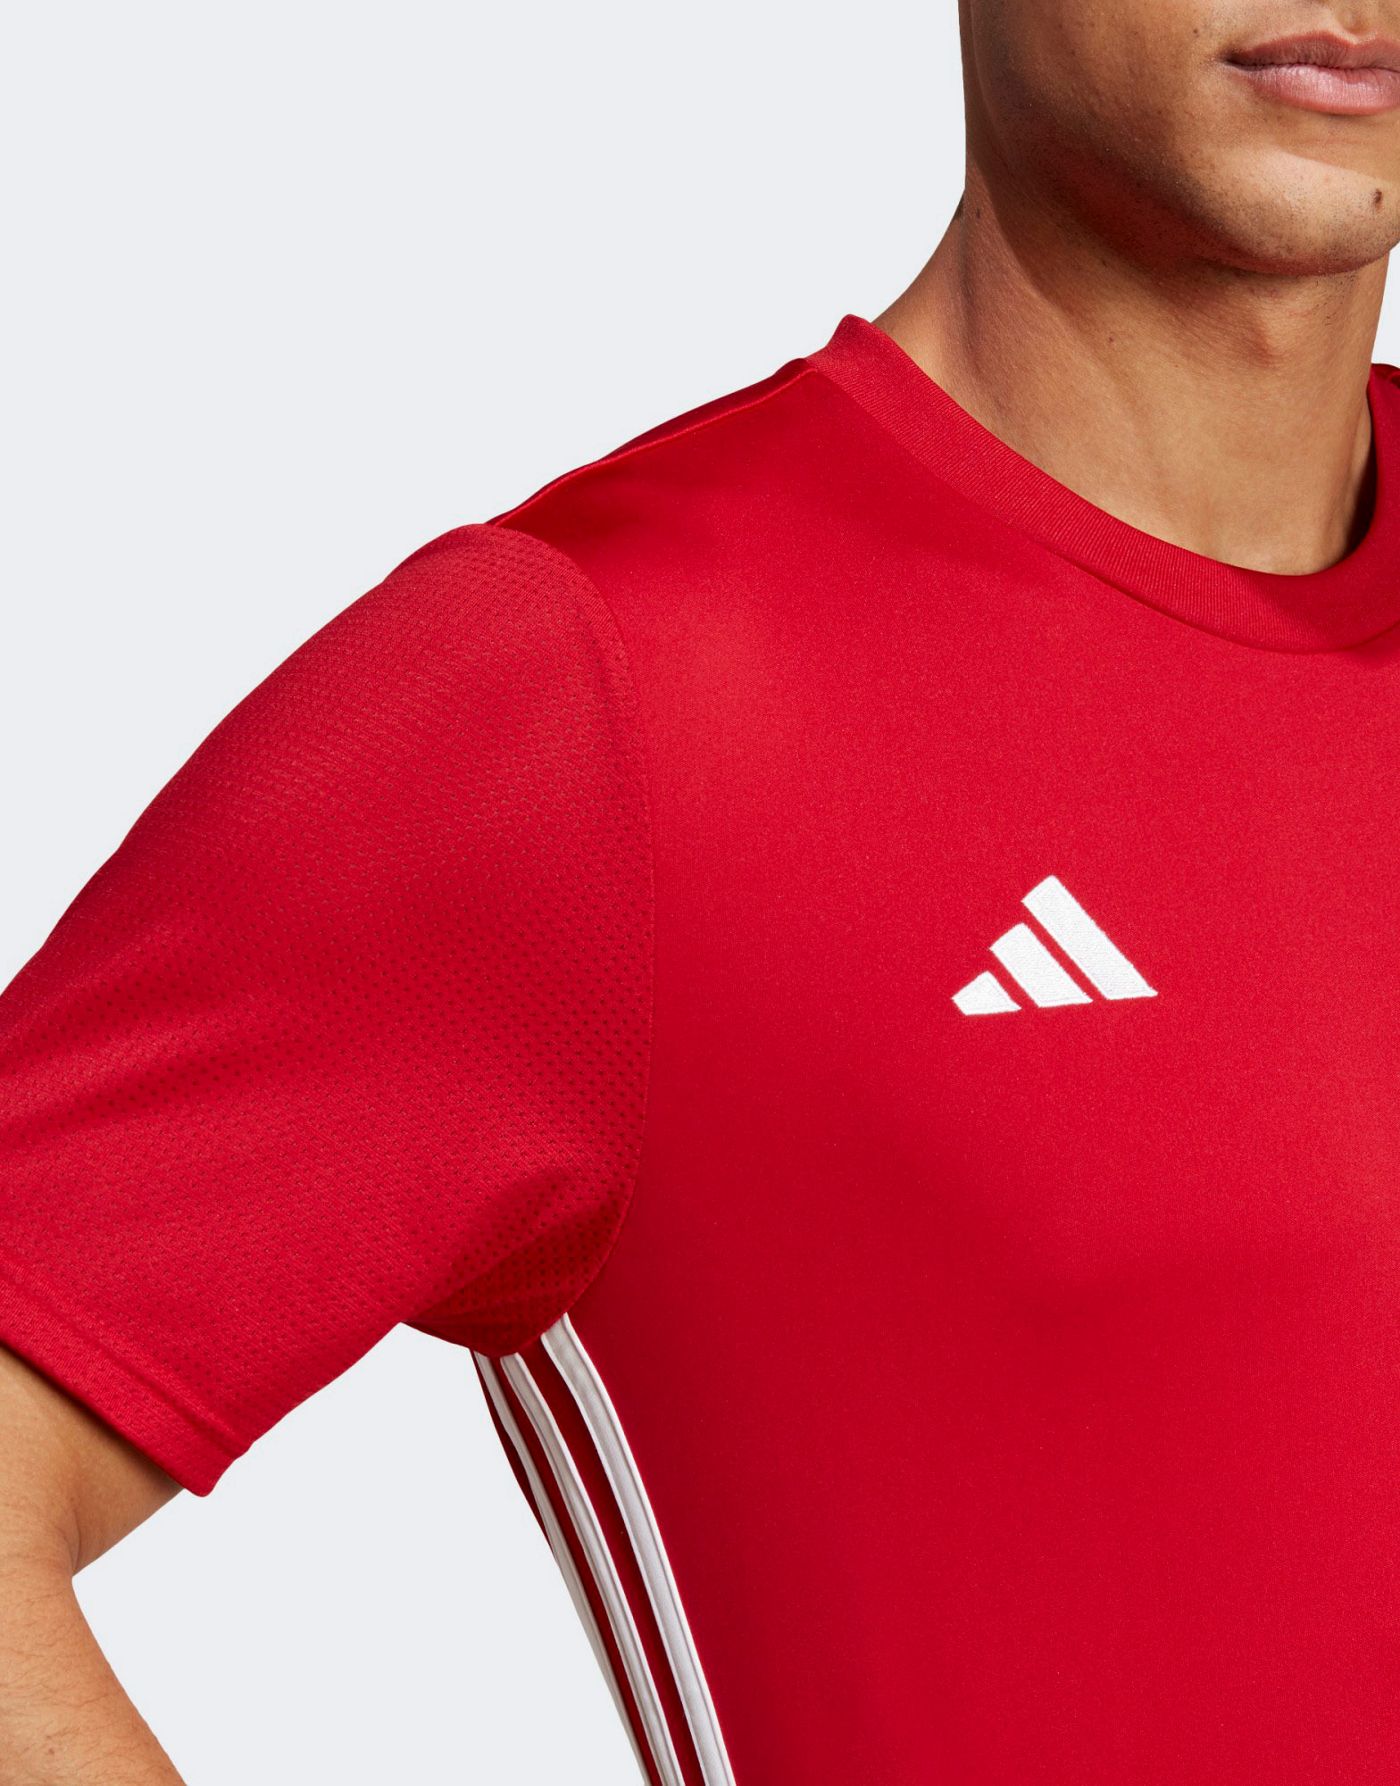 adidas performance Tabela 23 Jersey t-shirt in Red